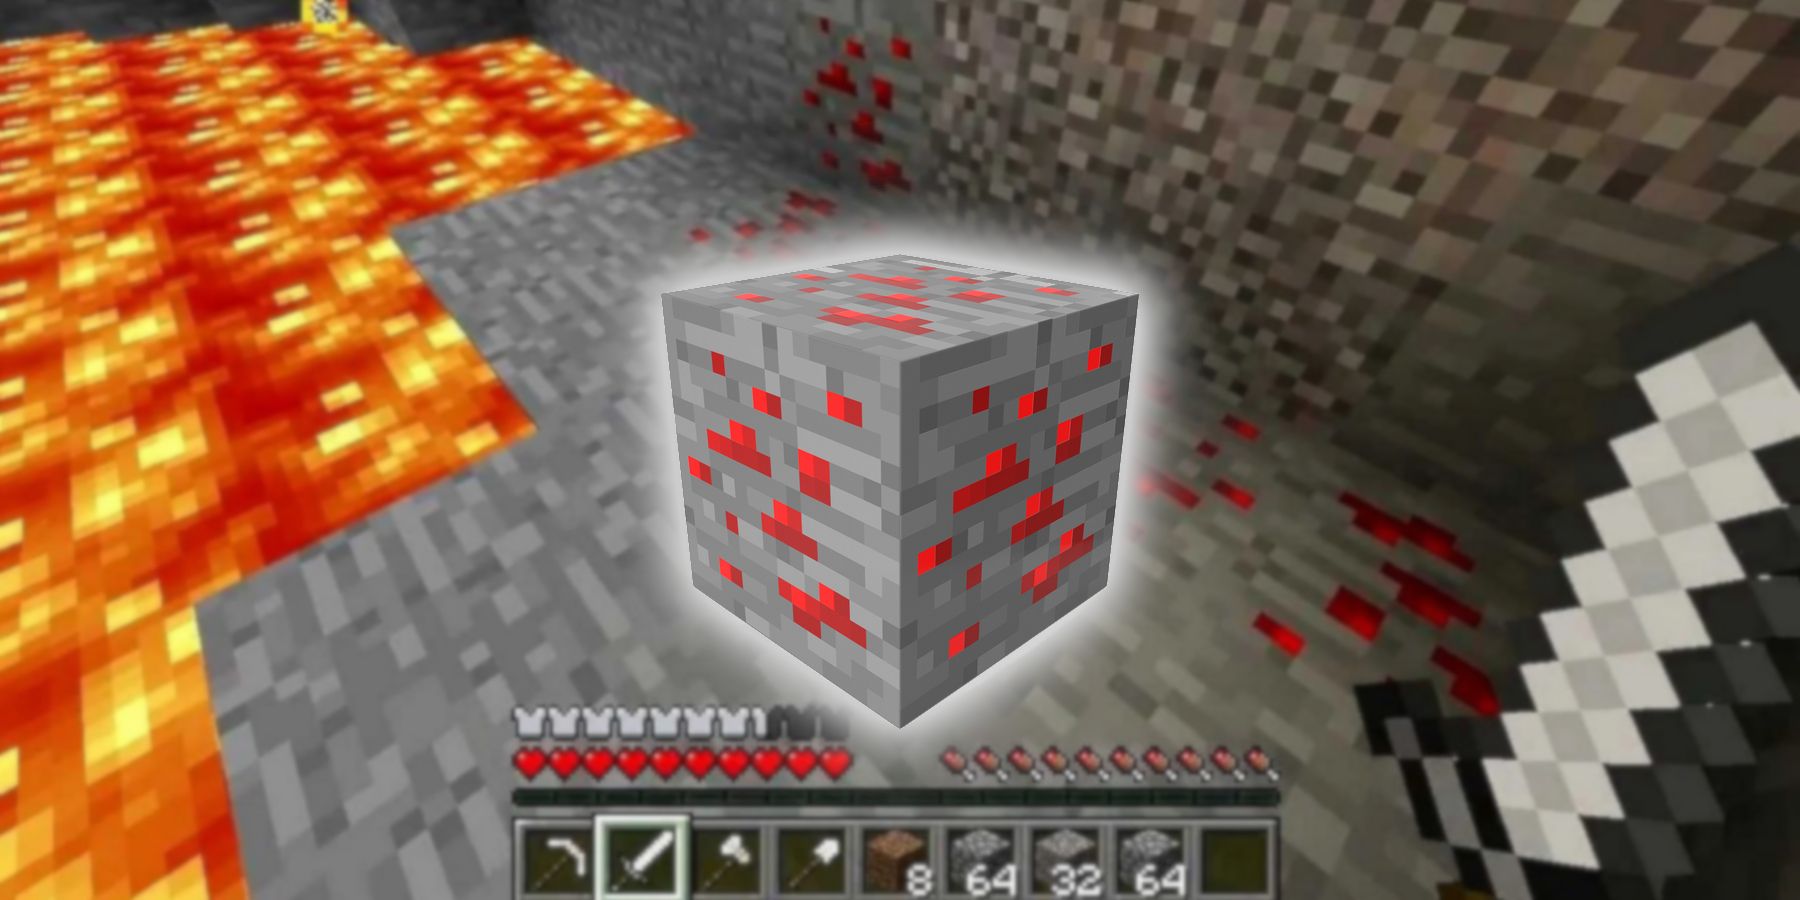 Screenshot from Minecraft showing a glowing redstone block in the center.